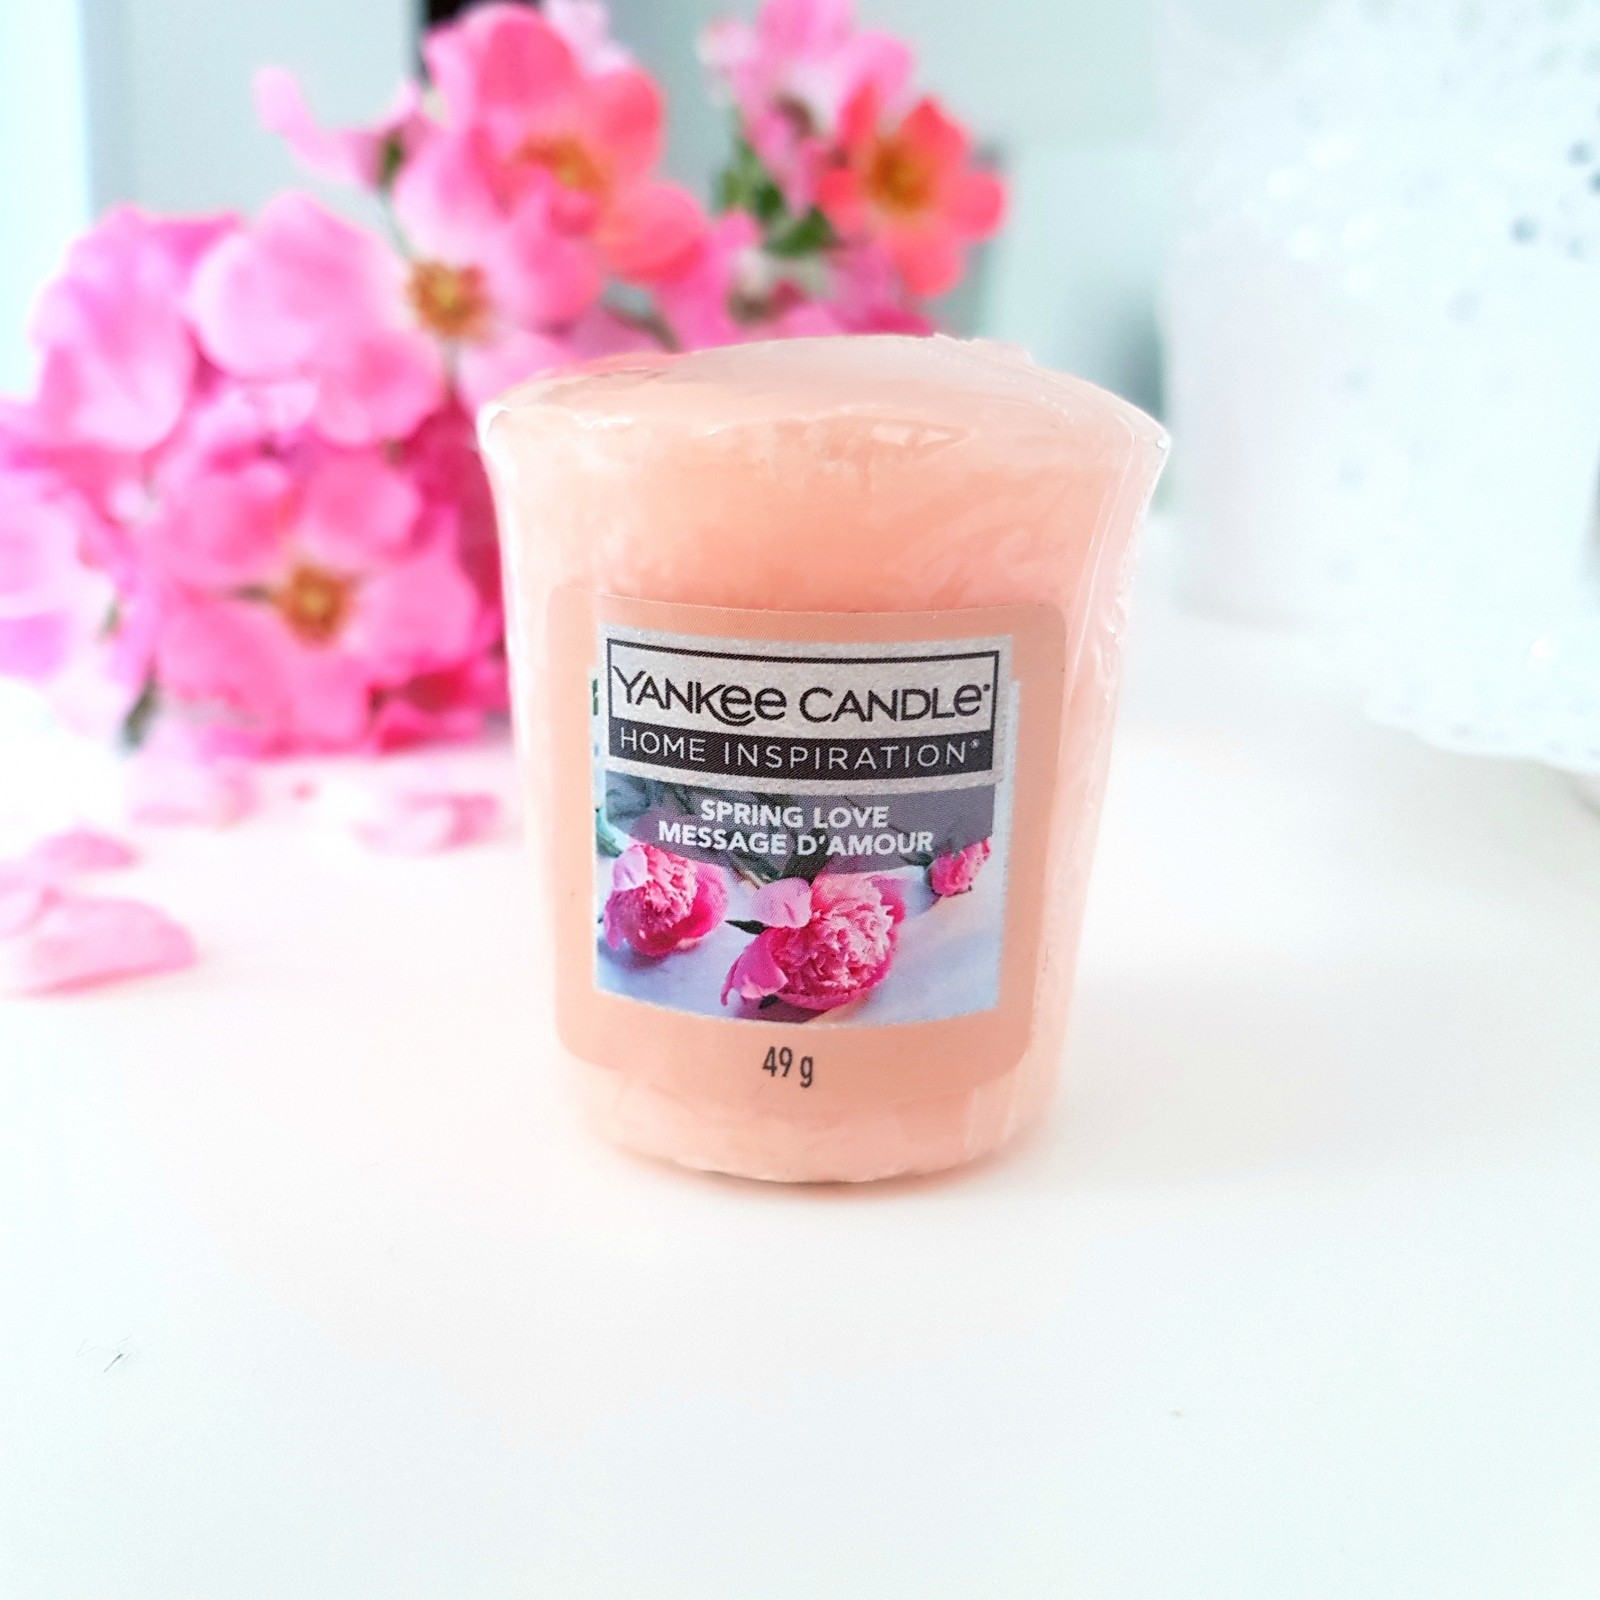 🌺 Spring Love Message D'amour - Yankee Candle 🌺